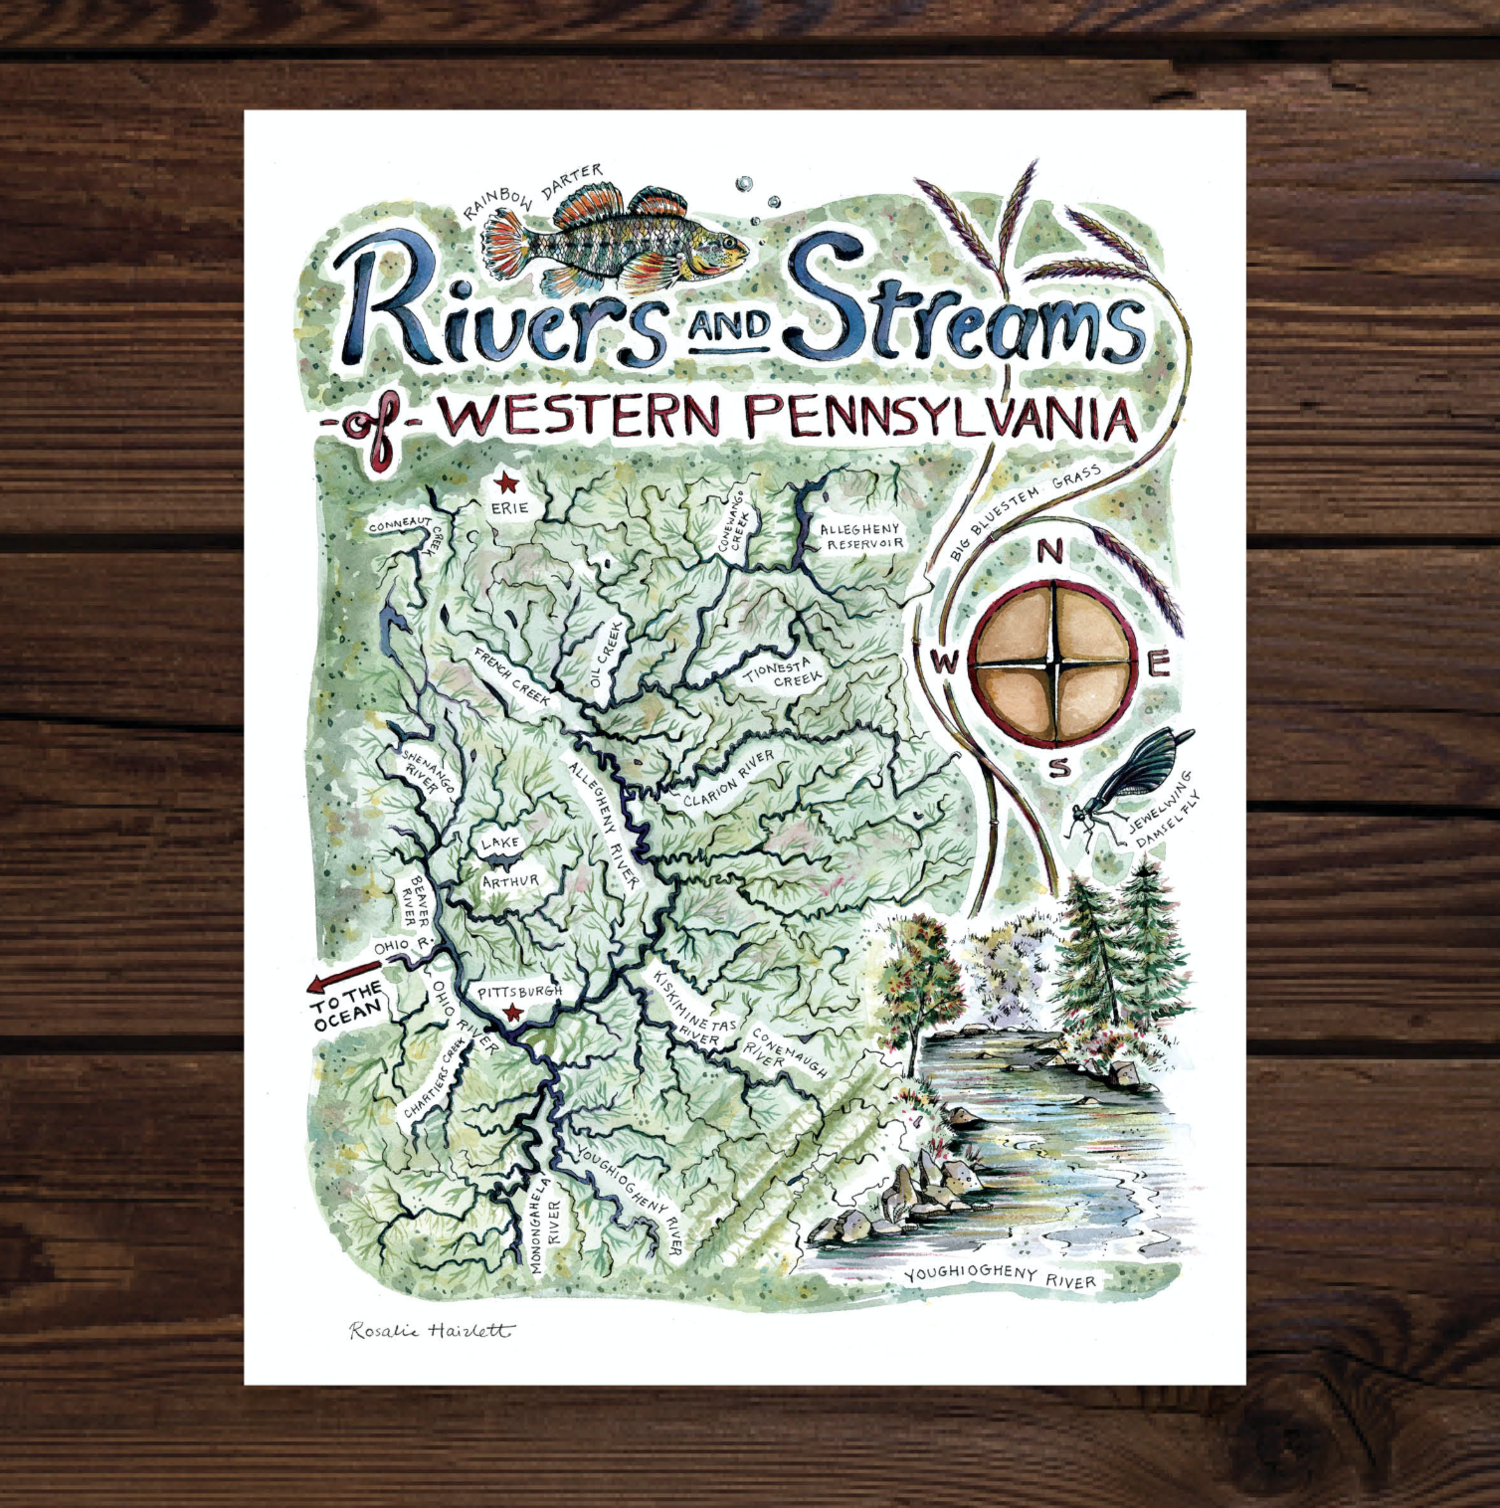 Illustrated map of the watersheds of Western Pennsylvania for Dancing Gnome Brewery